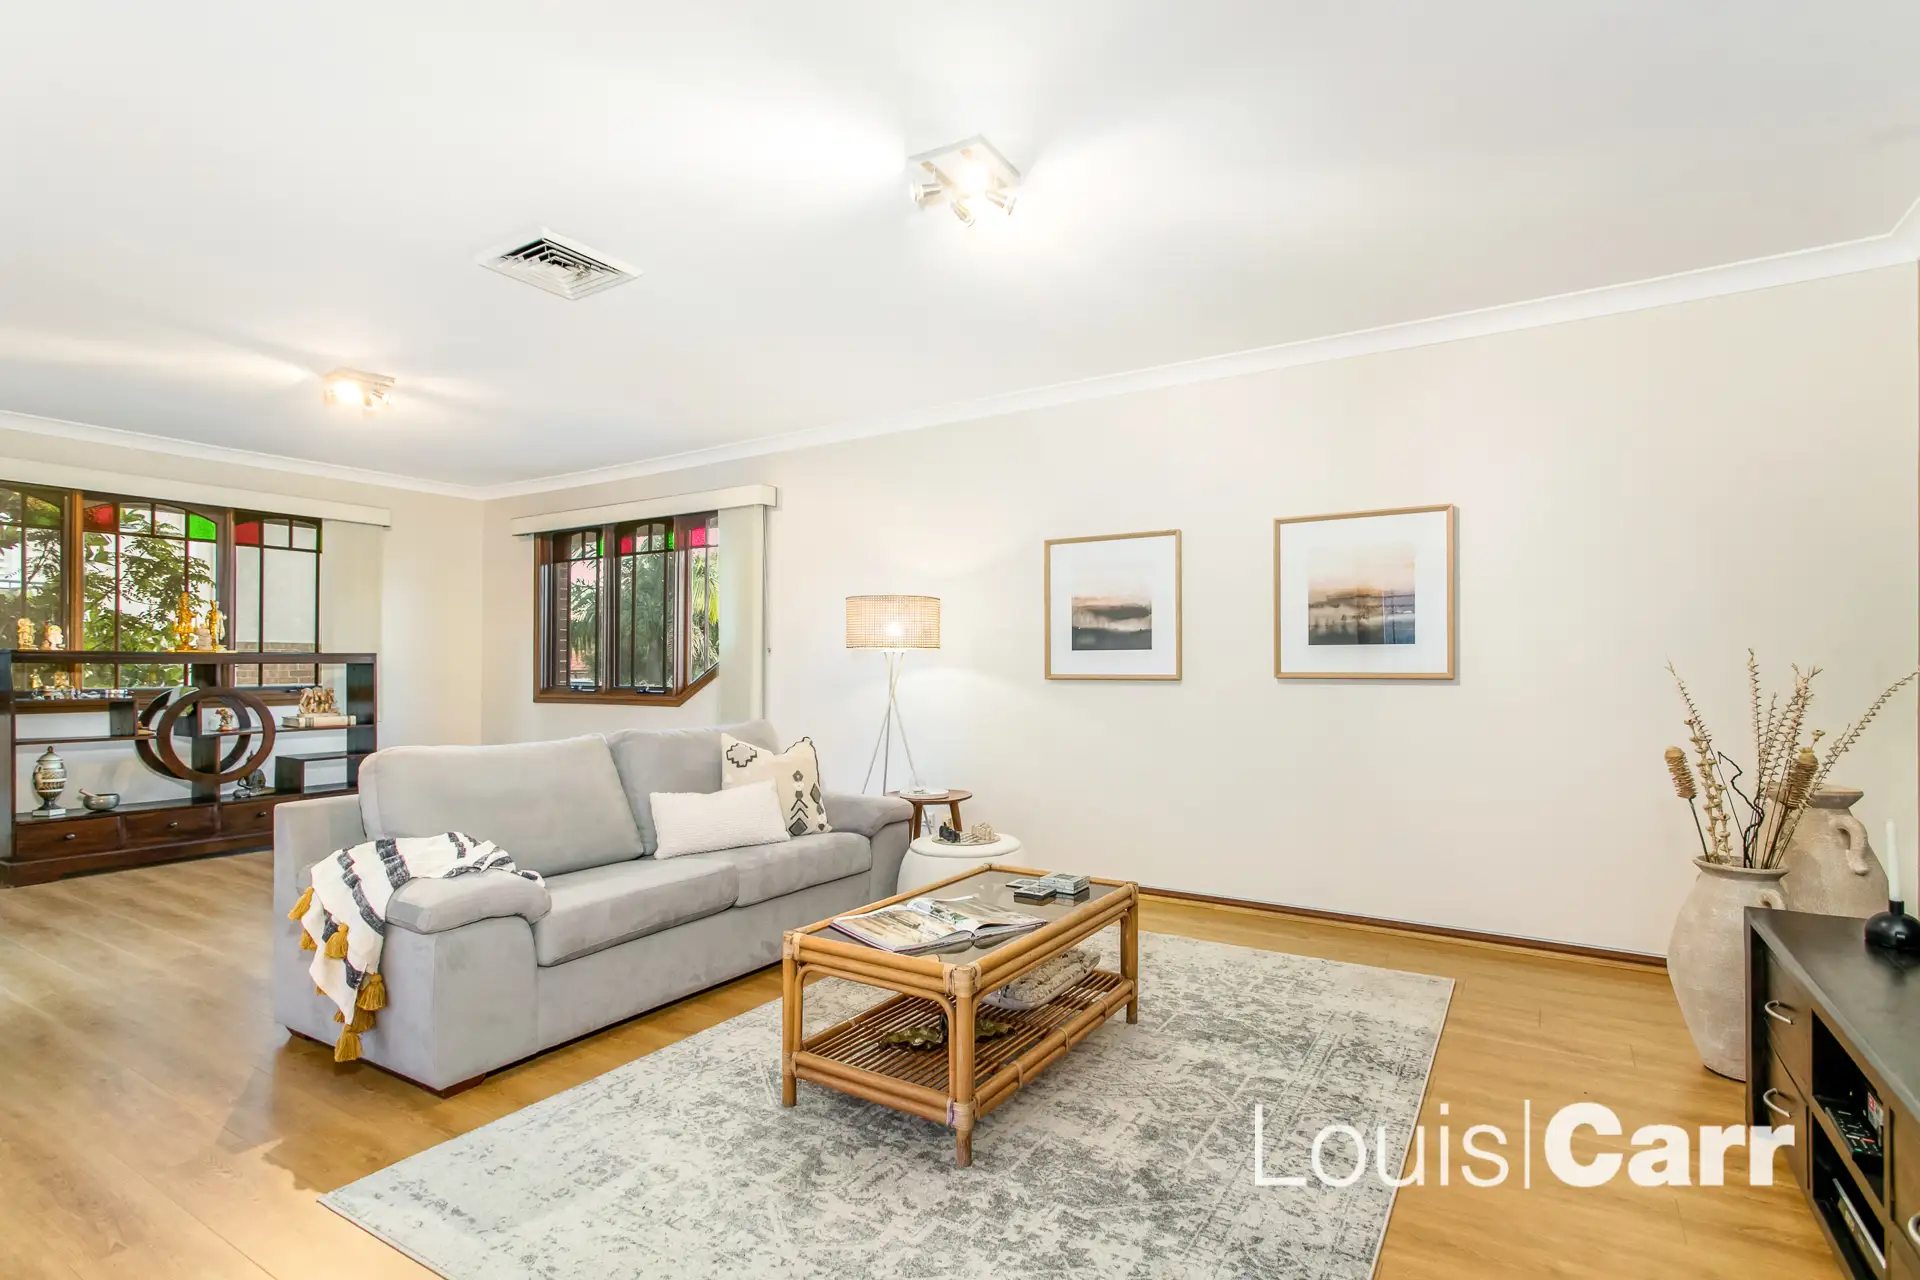 Photo #3: 8 Millers Way, West Pennant Hills - Sold by Louis Carr Real Estate